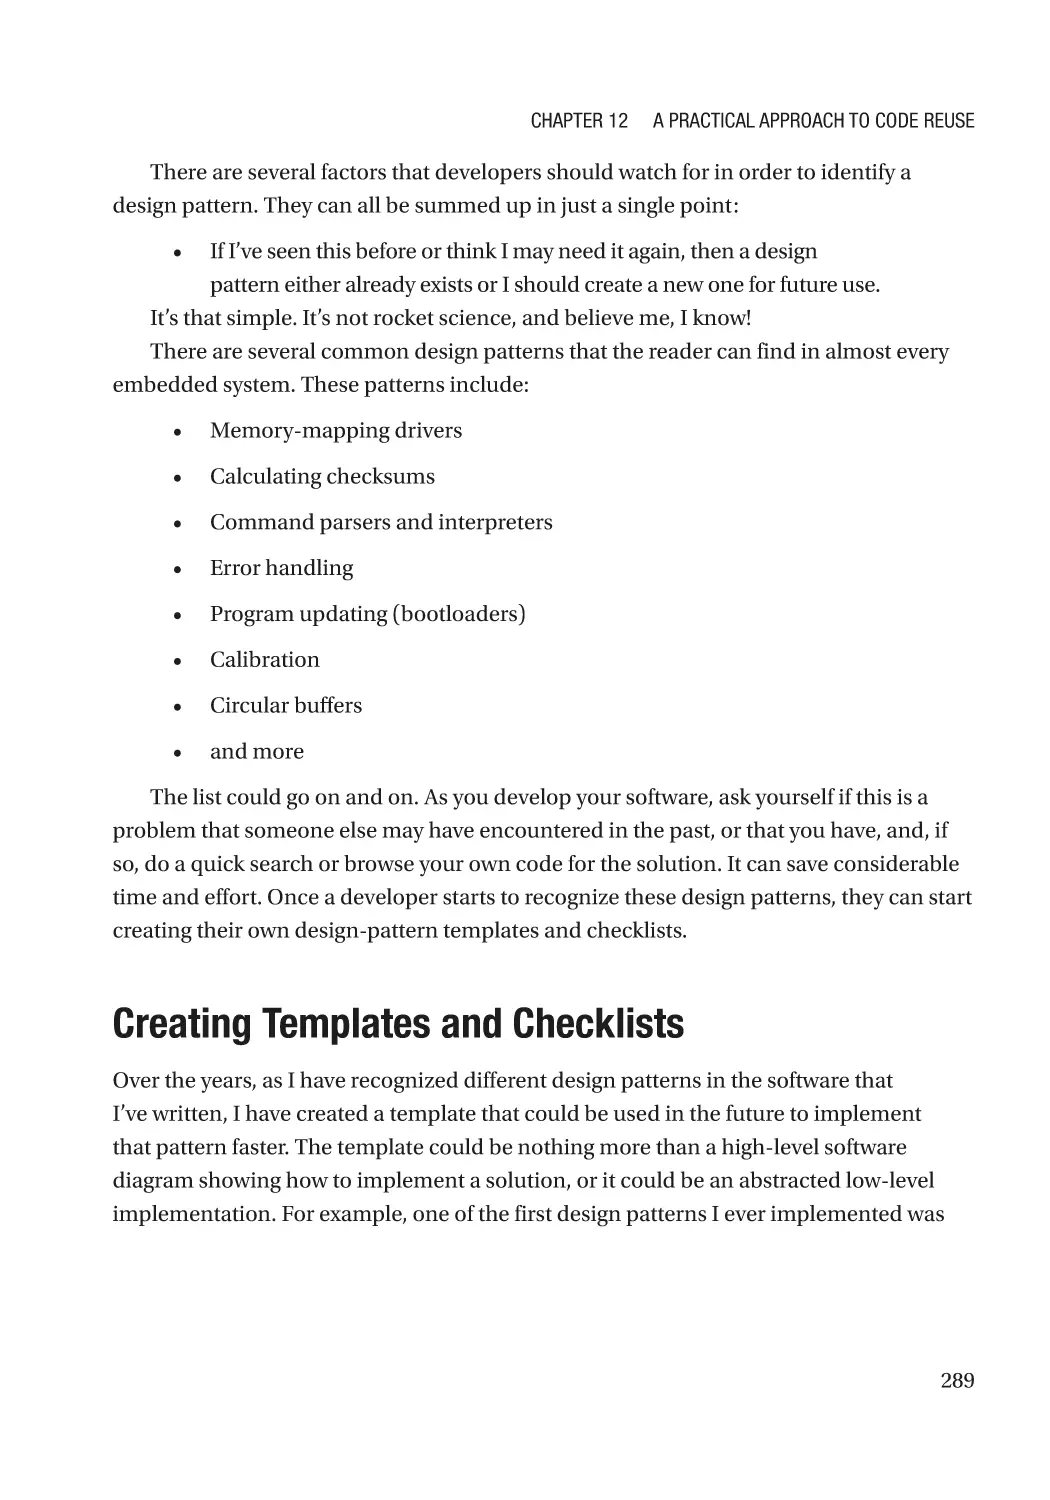 Creating Templates and Checklists